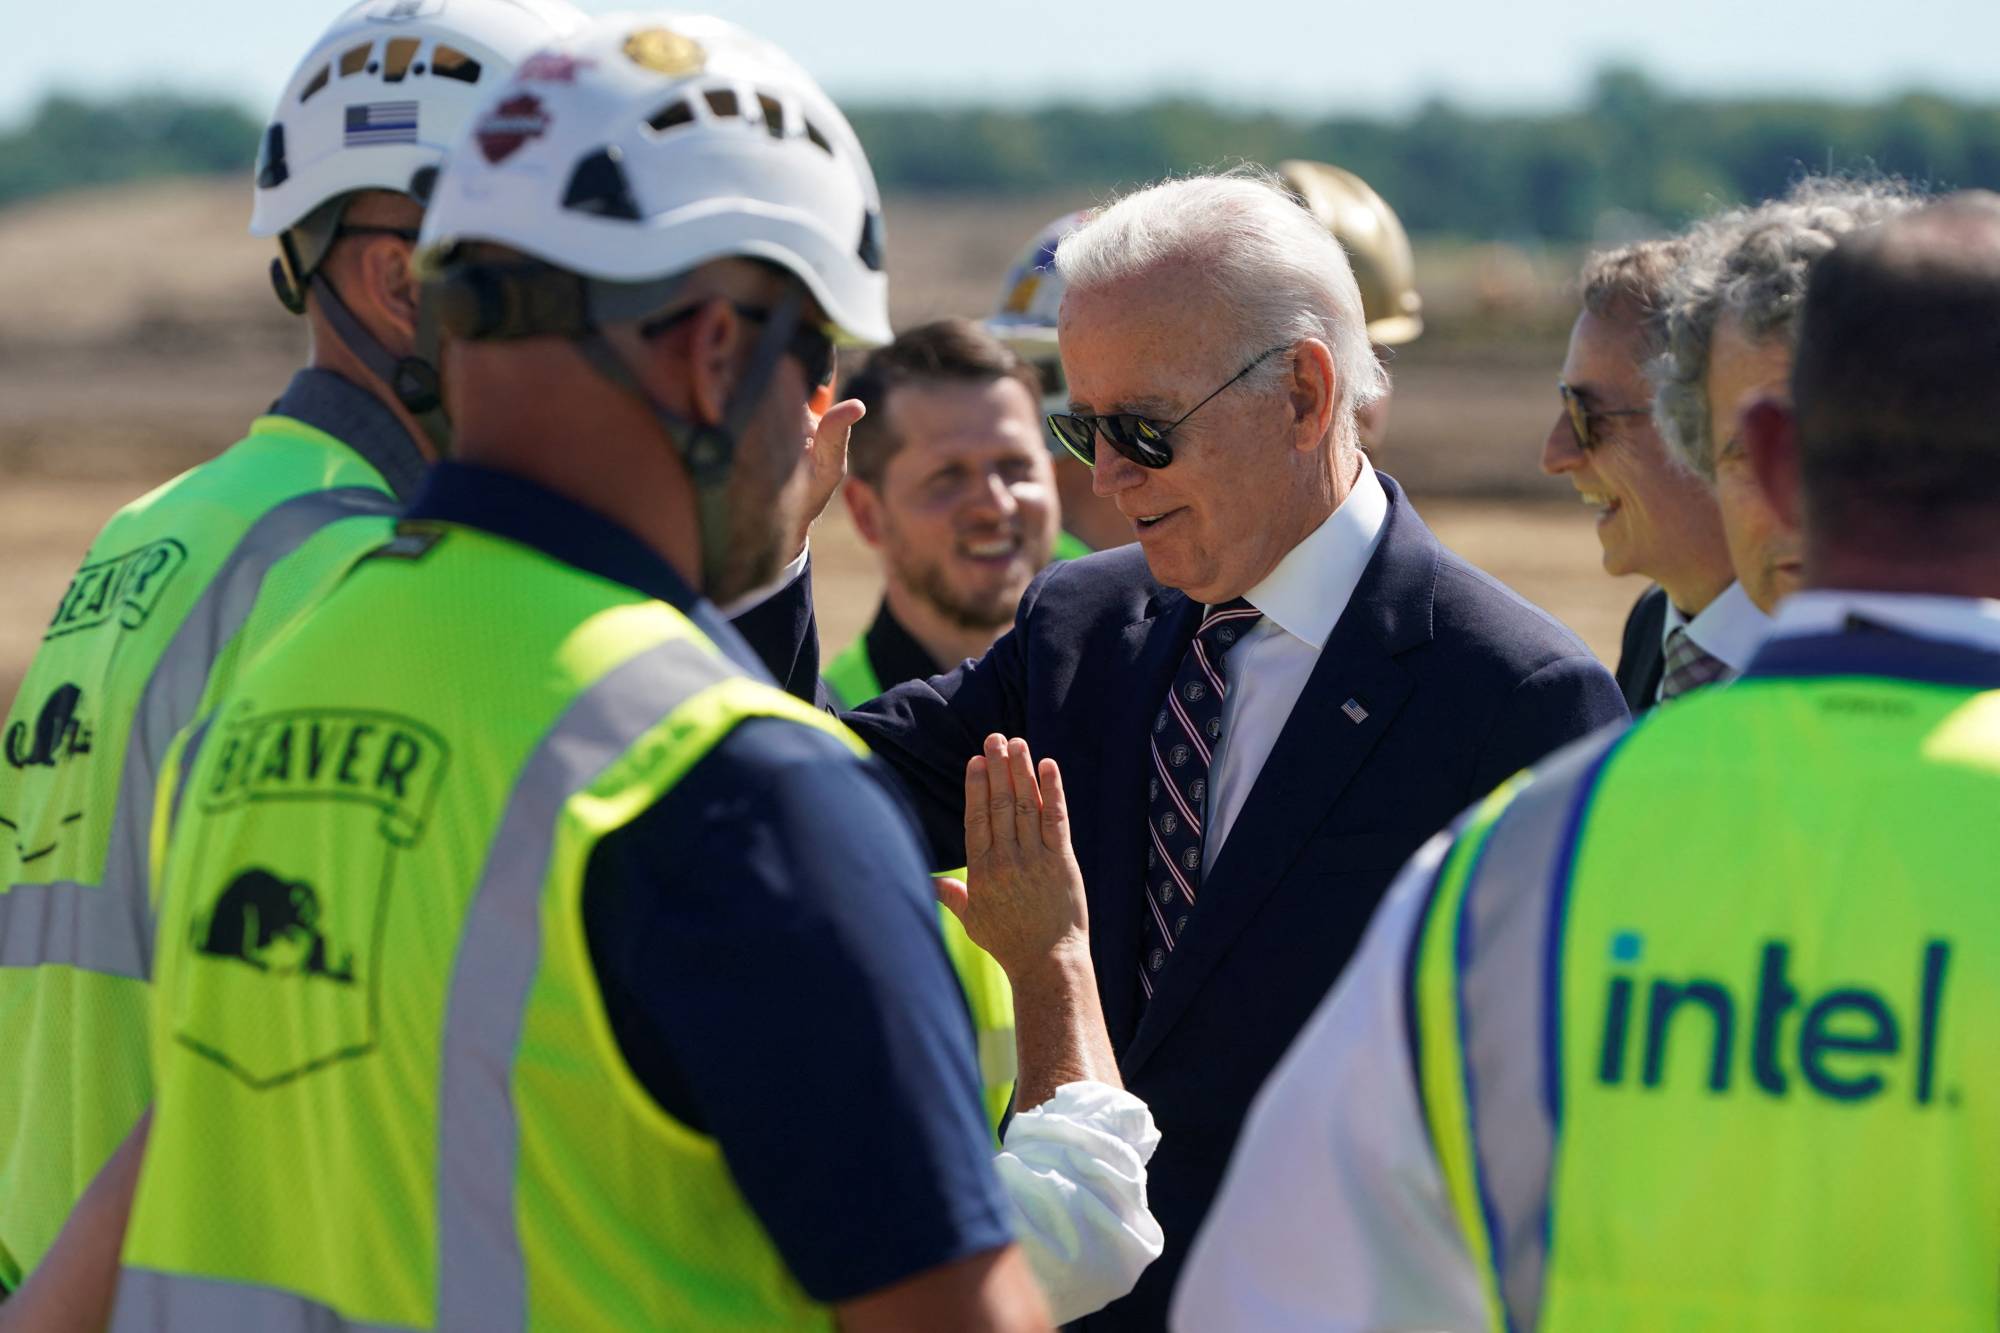 U.S. President Joe Biden attends the groundbreaking of a new Intel semiconductor manufacturing facility in New Albany, Ohio on Sept. 9. With its relationship with China, the U.S. is facing a very different chip war to its conflict with Japan more two decades ago. | REUTERS